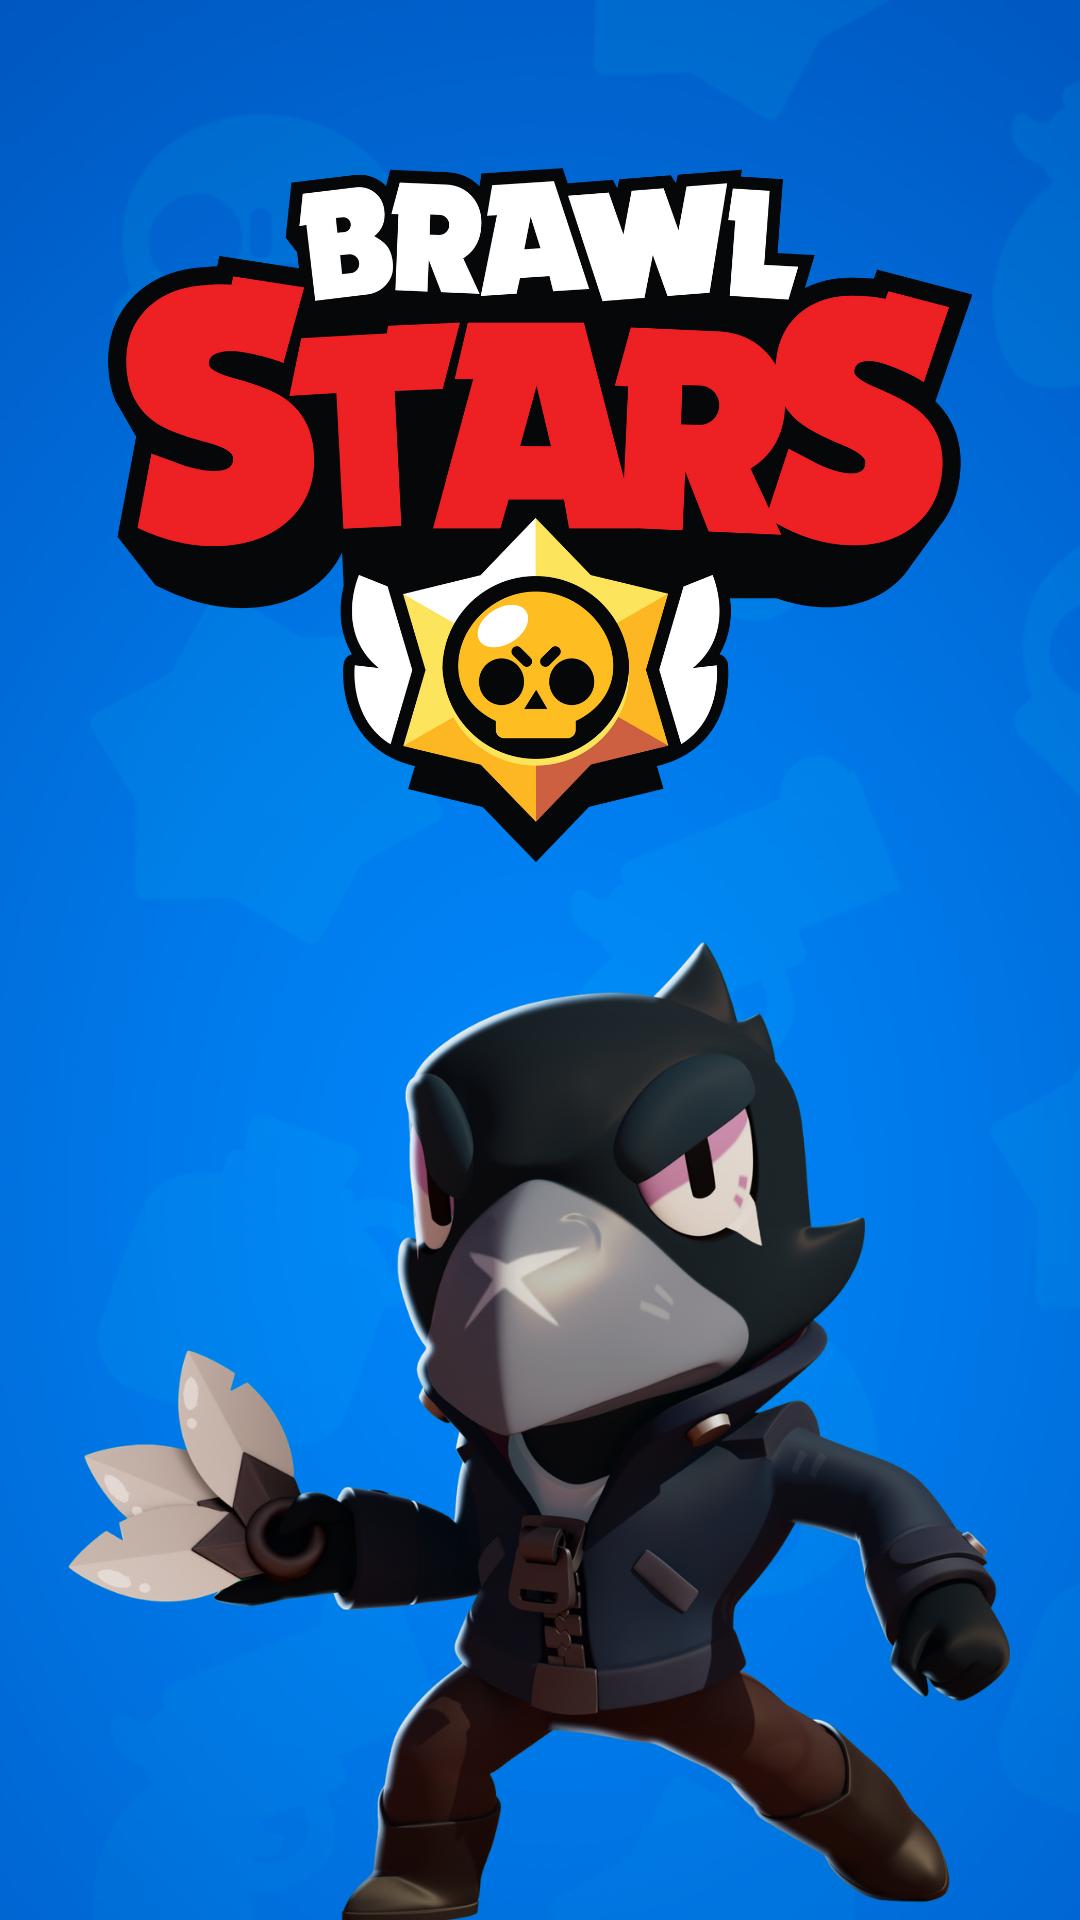 Crow Vs Spike Wallpaper Hd For Android Apk Download - brawl stars leon and crow and spike